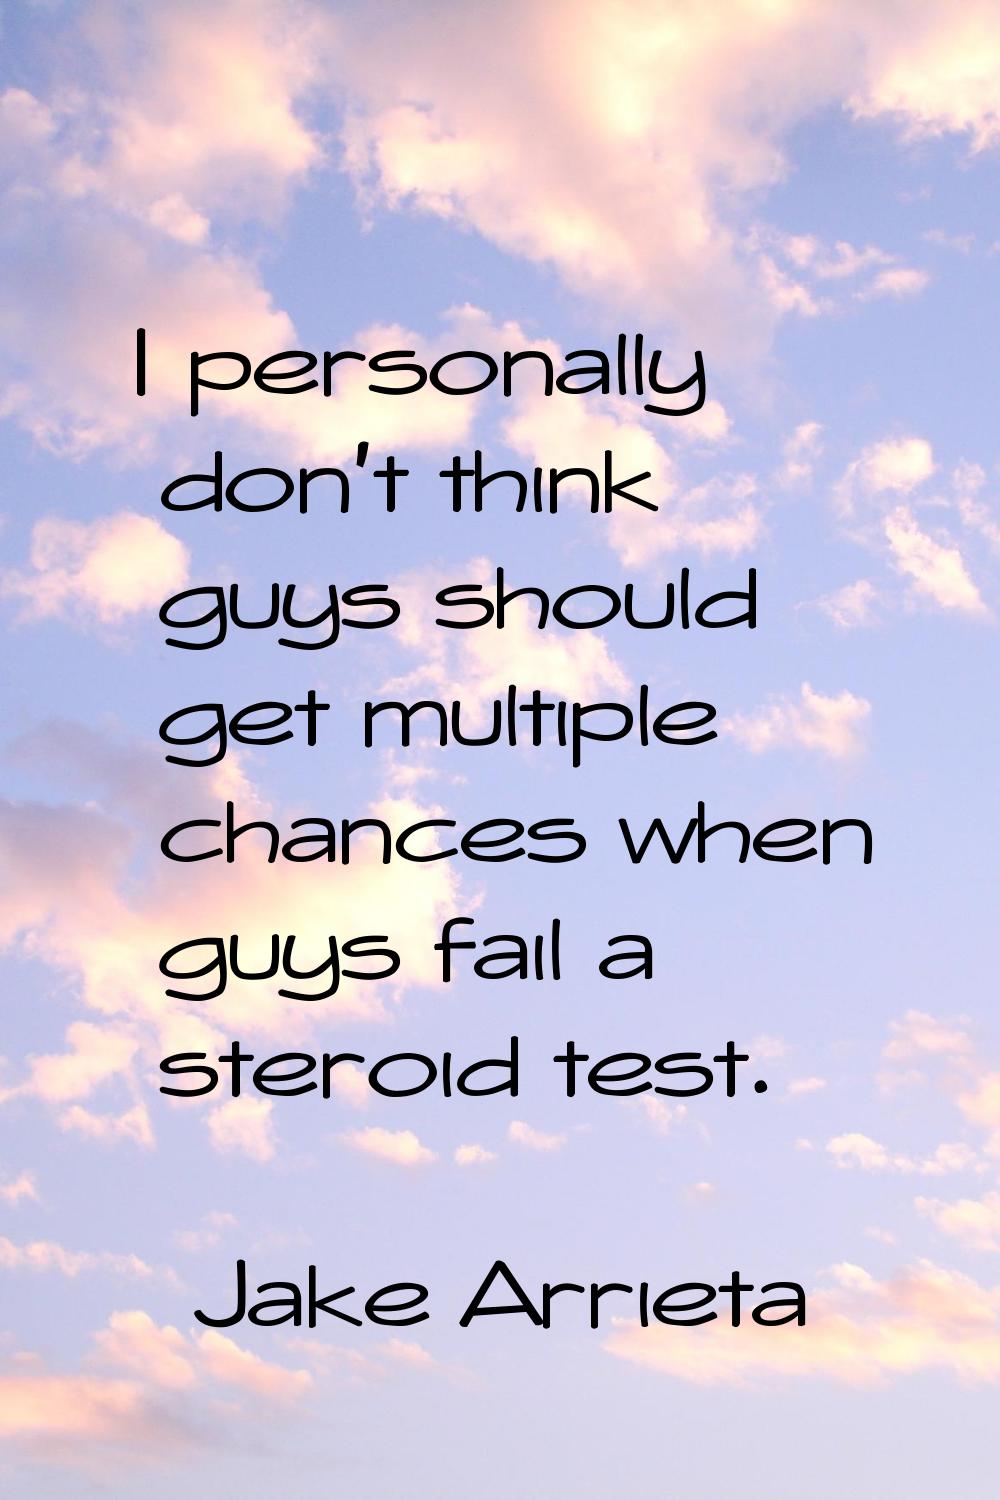 I personally don't think guys should get multiple chances when guys fail a steroid test.